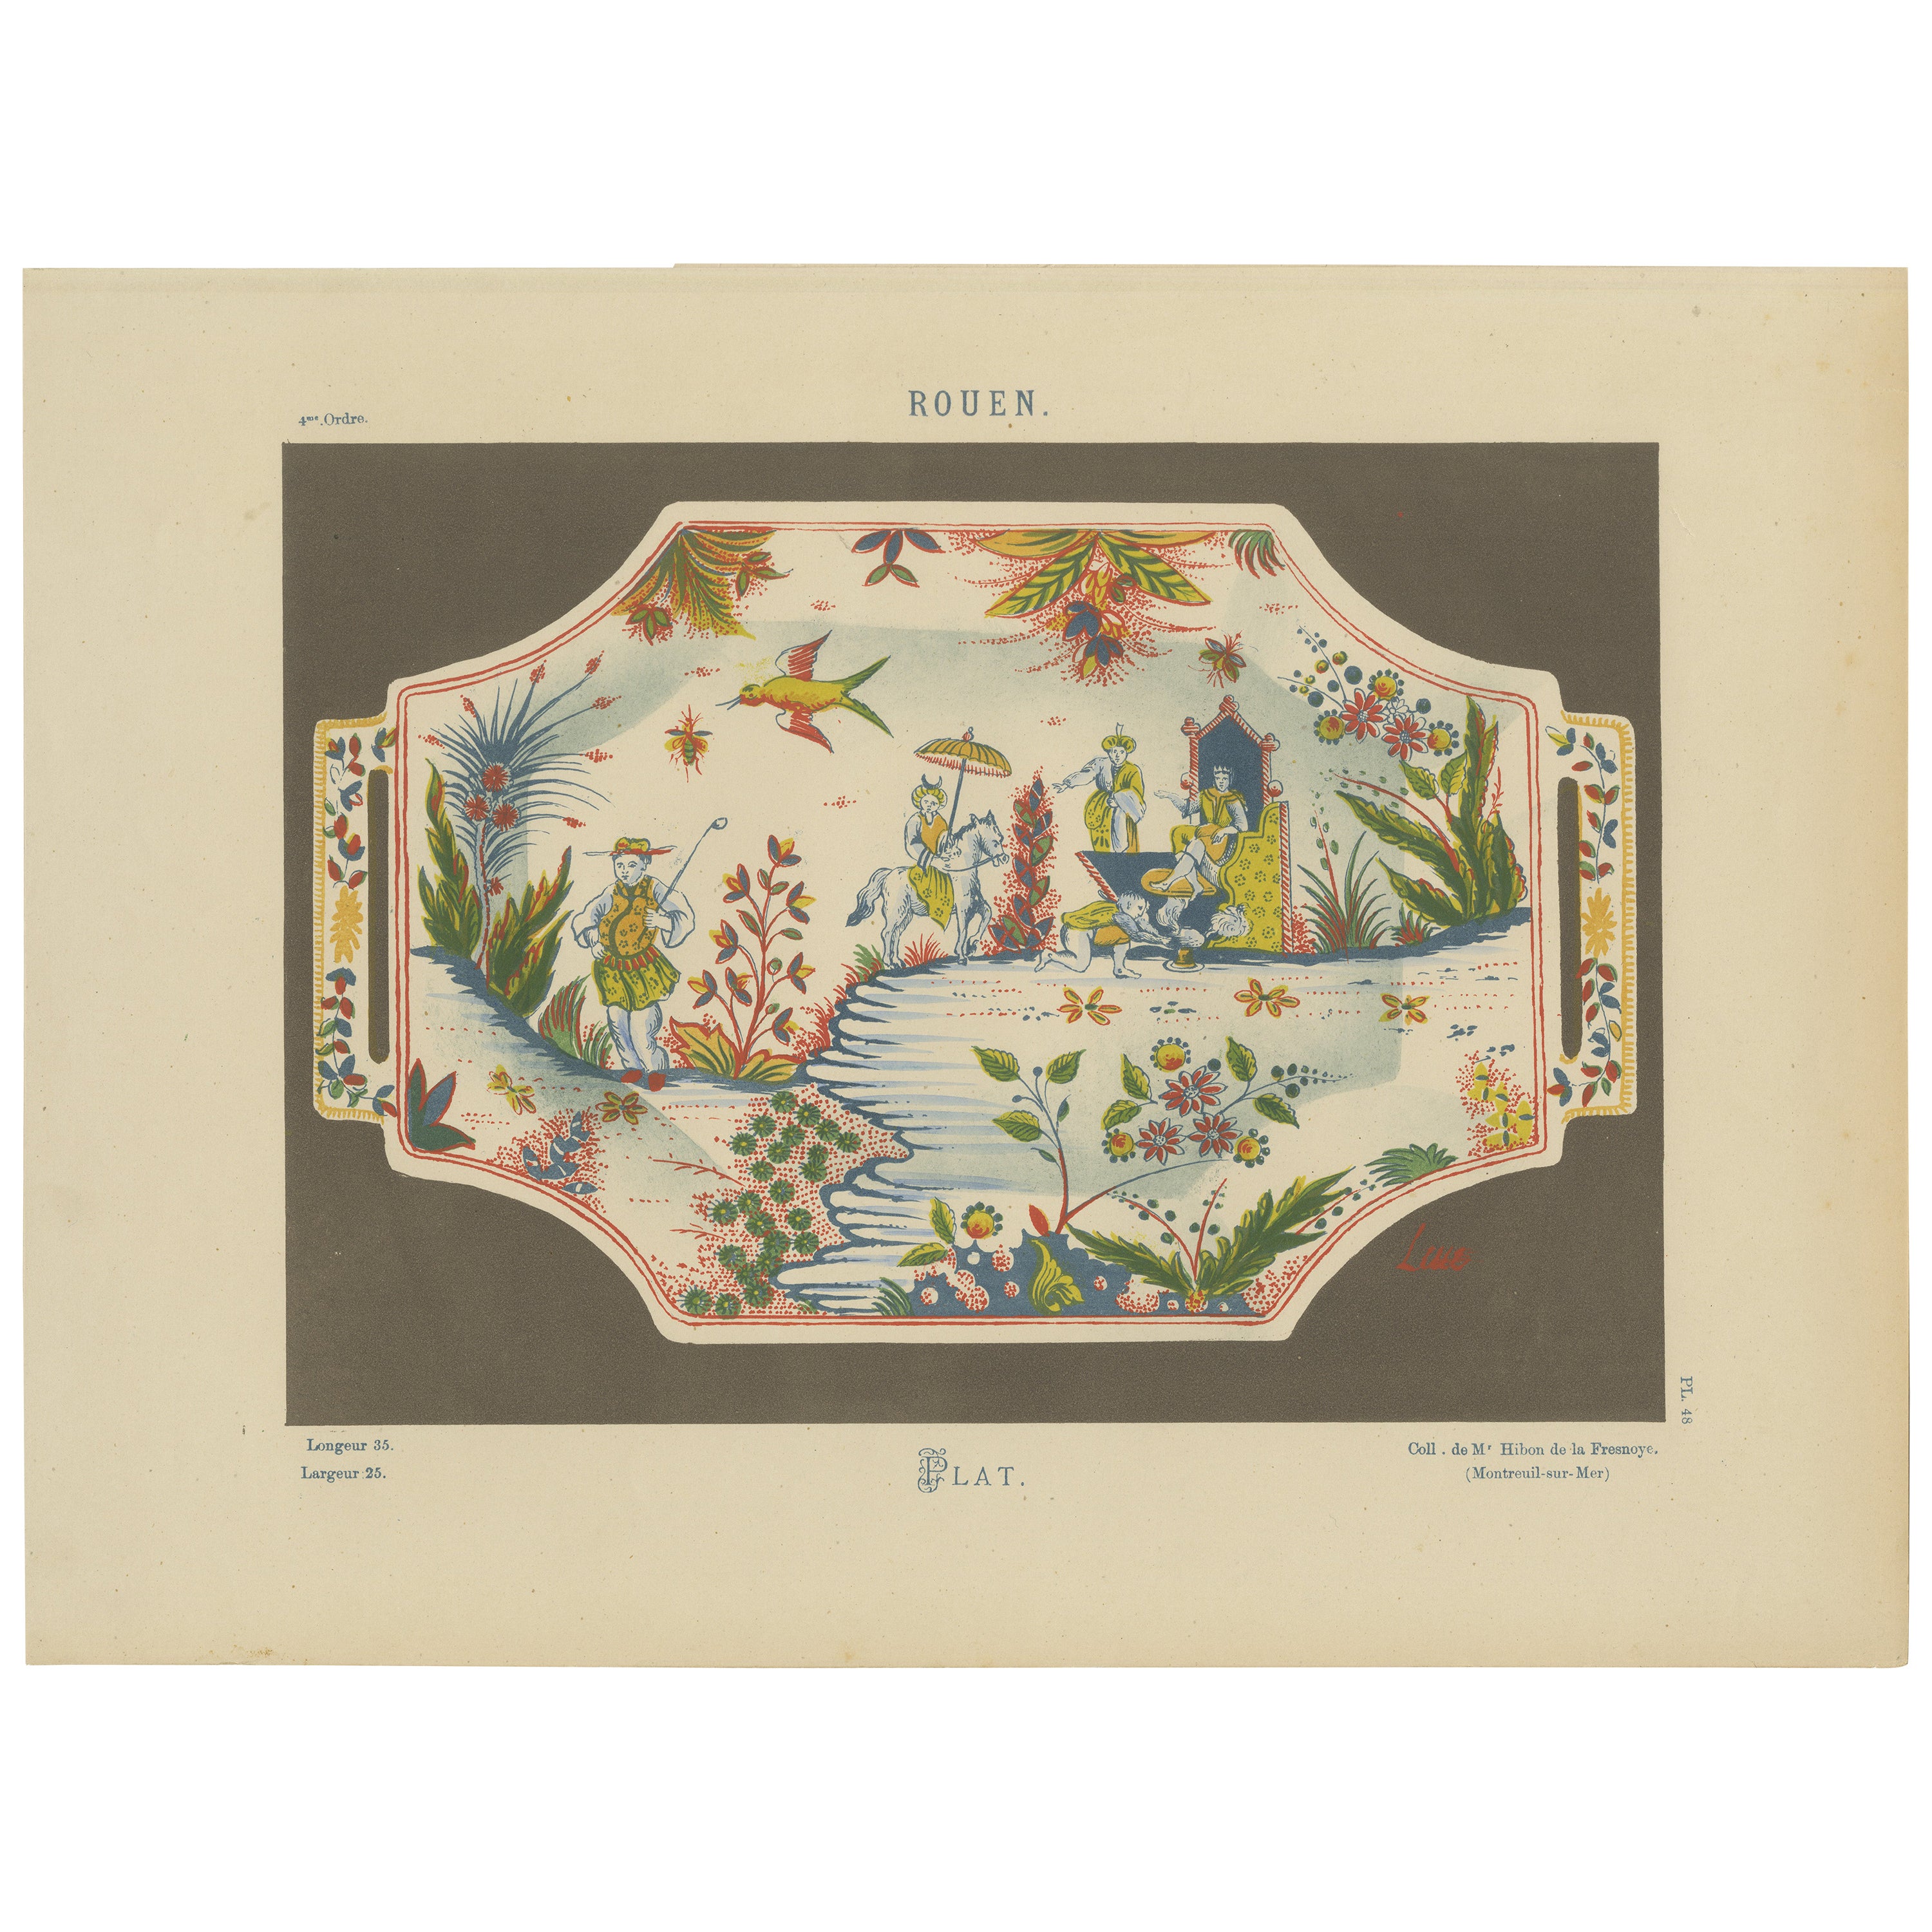 Exquisite Rouen Plate Illustration: A Vivid Tableau of French Life, 1874  